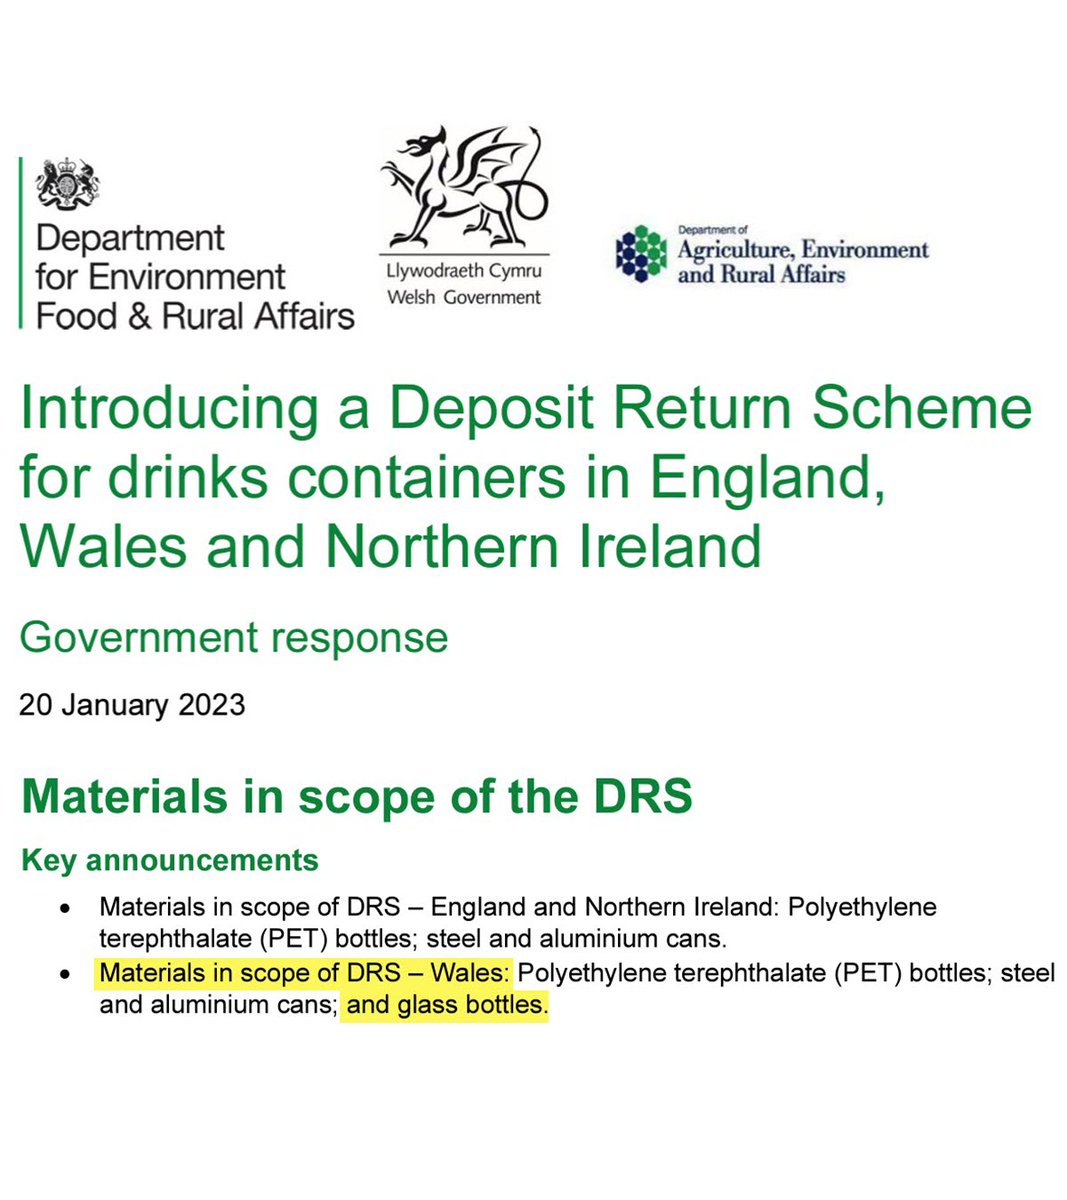 Now we know that Wales will collect glass under the UK DRS scheme, it's clear that the relentless grievance of the Scottish Tories and the blocking by the English Tories is simply because they don't want Scotland to be seen as leading the way.
#drs